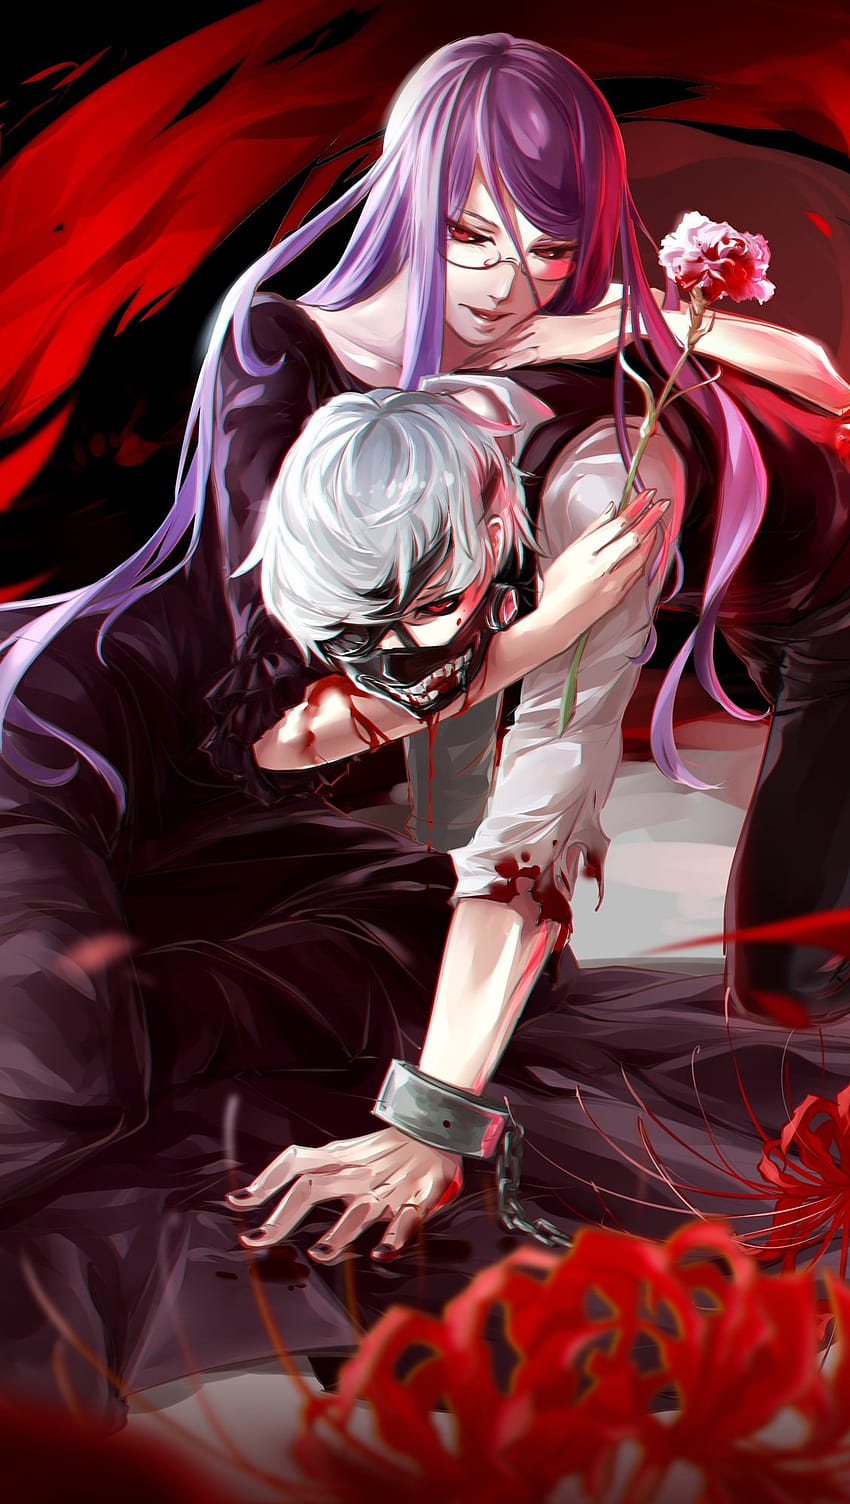 100+] Tokyo Ghoul Characters Wallpapers | Wallpapers.com